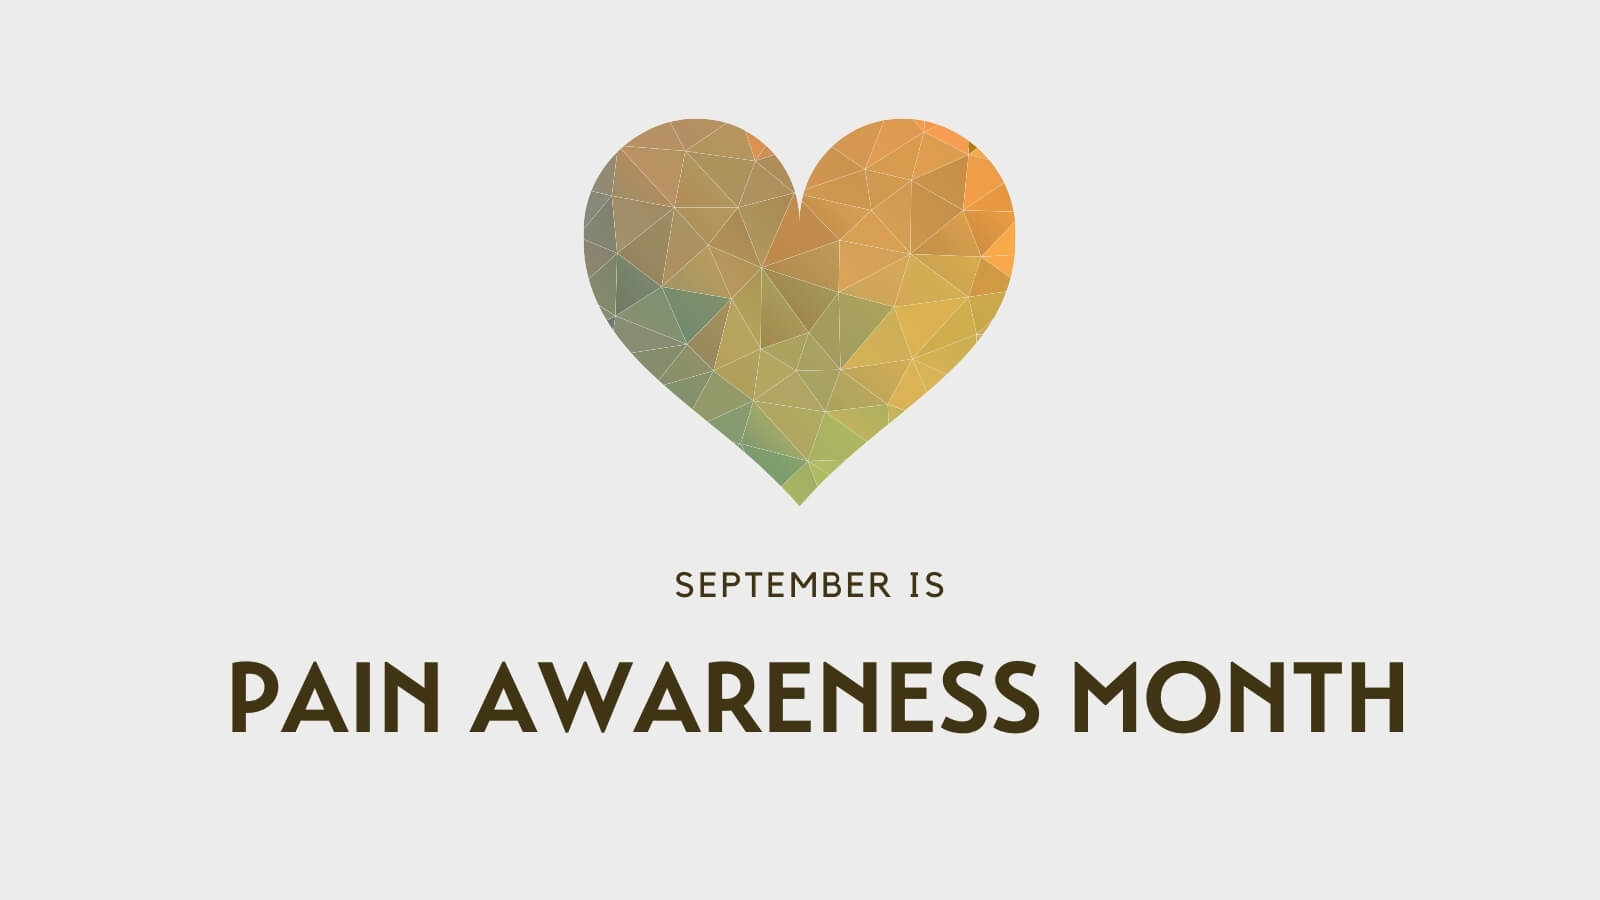 September is Pain Awareness Month